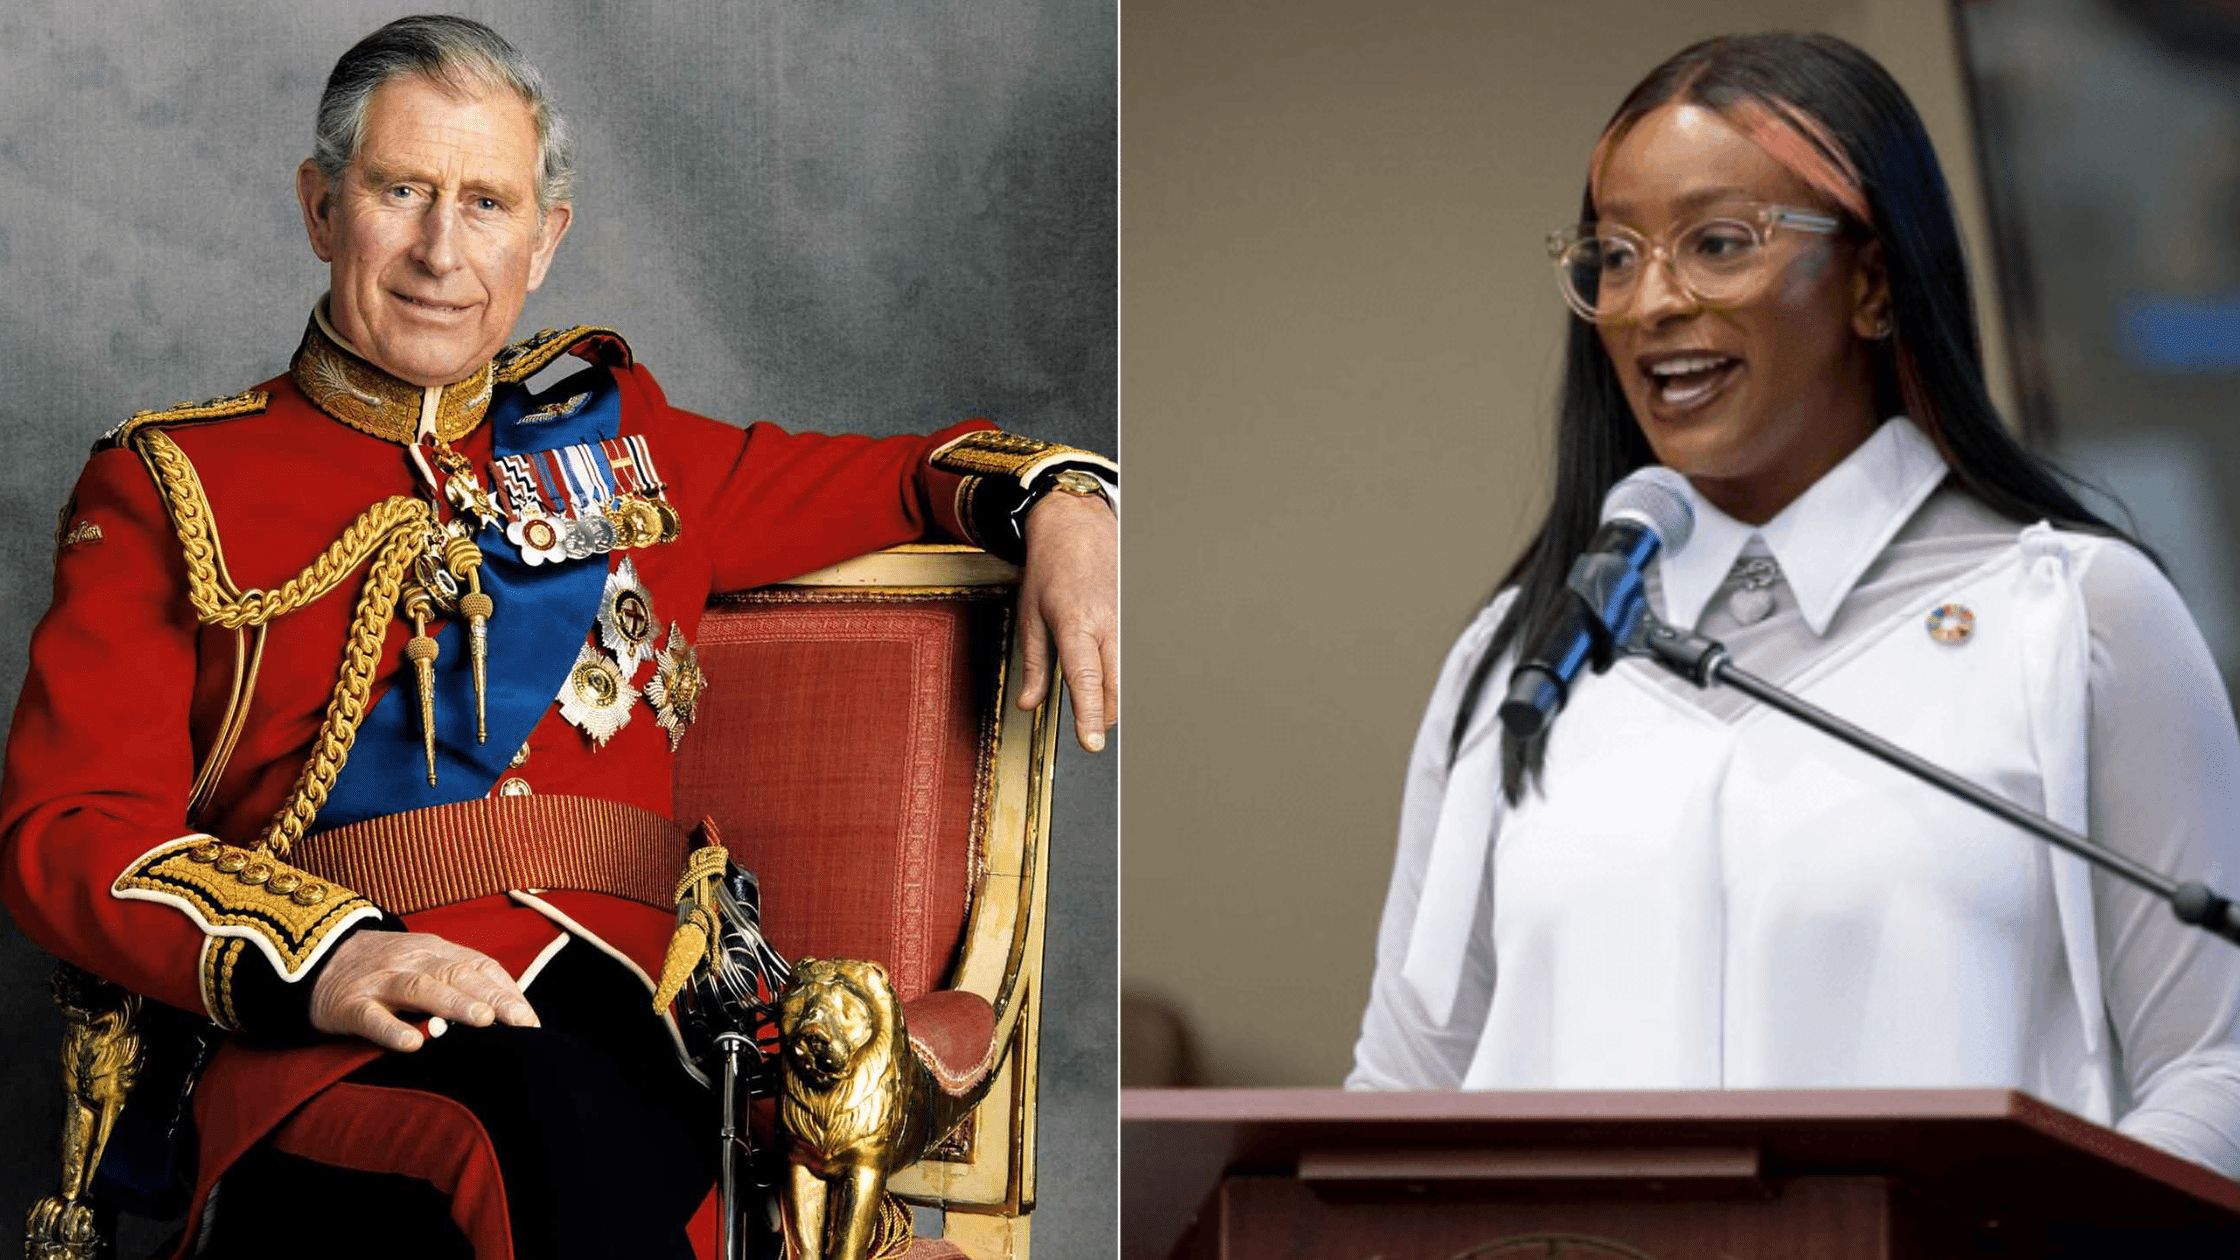 DJ Cuppy Announces As King Charles III Invites Her To A Reception At Buckingham Palace